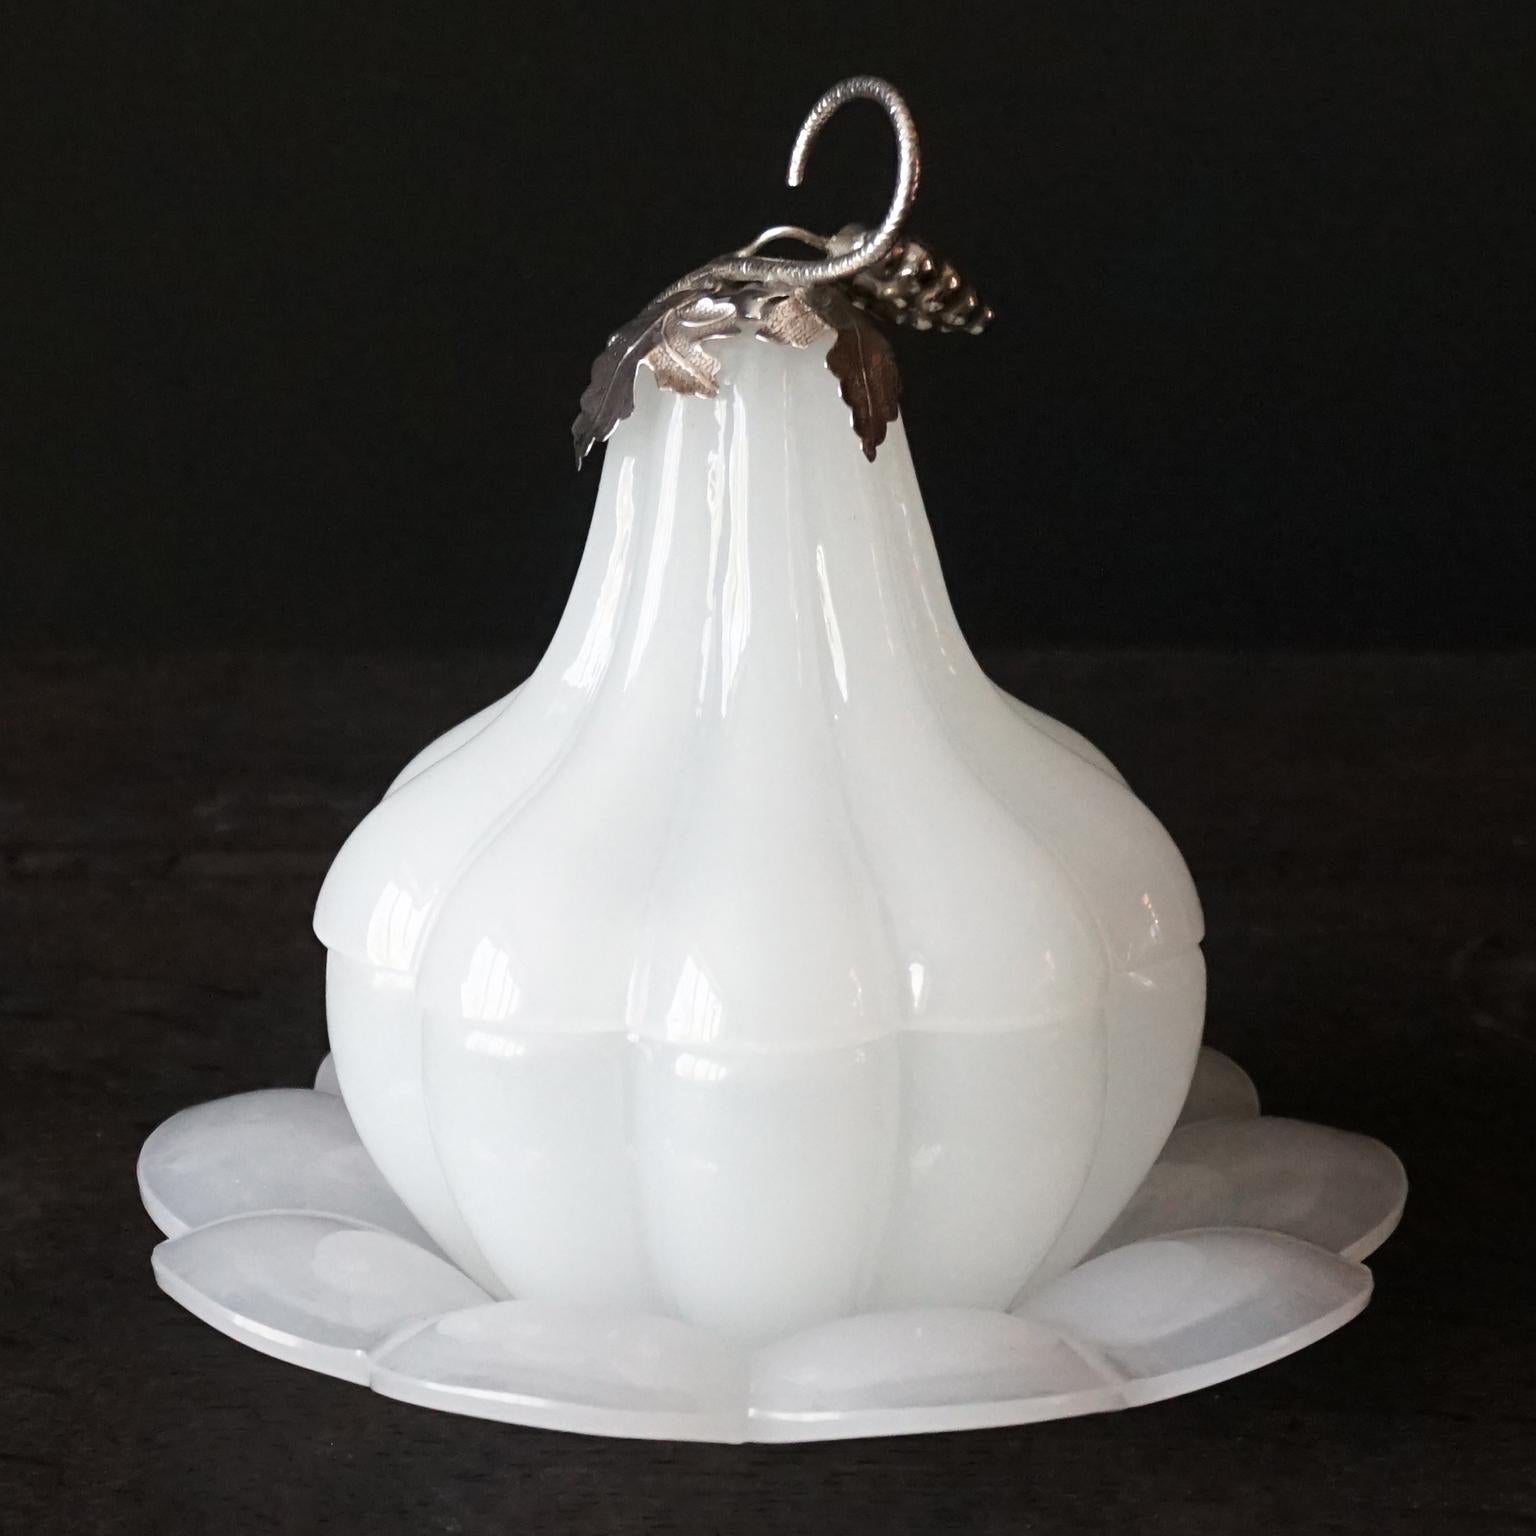 20th Century 1950s White Opaline Glass Pear or Gourd Lidded Jar with Silver Grapes and Leaves For Sale